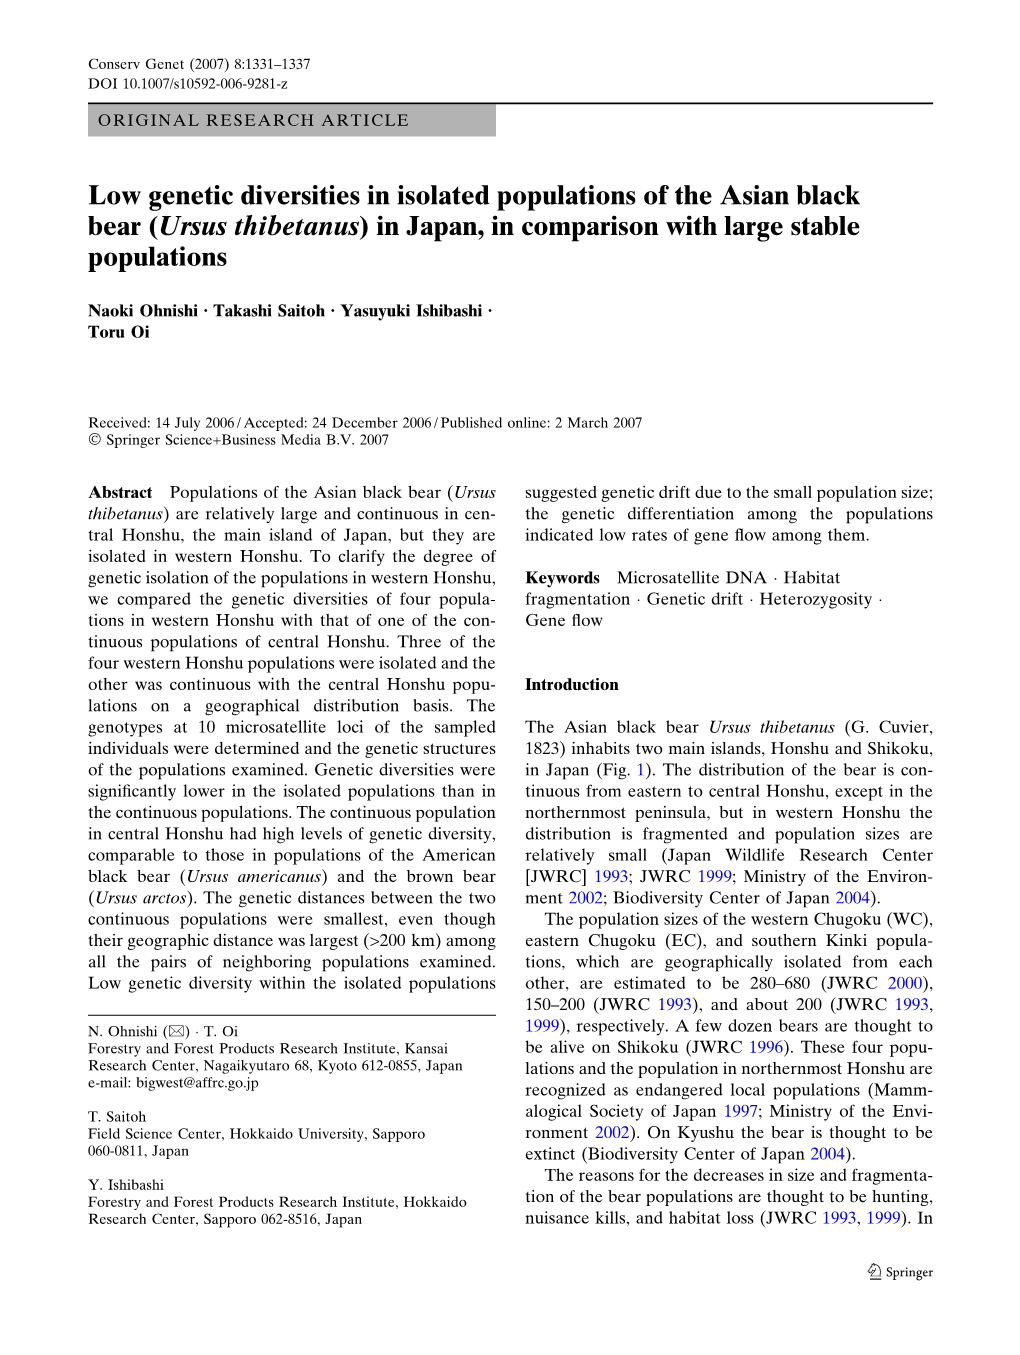 Low Genetic Diversities in Isolated Populations of the Asian Black Bear (Ursus Thibetanus) in Japan, in Comparison with Large Stable Populations